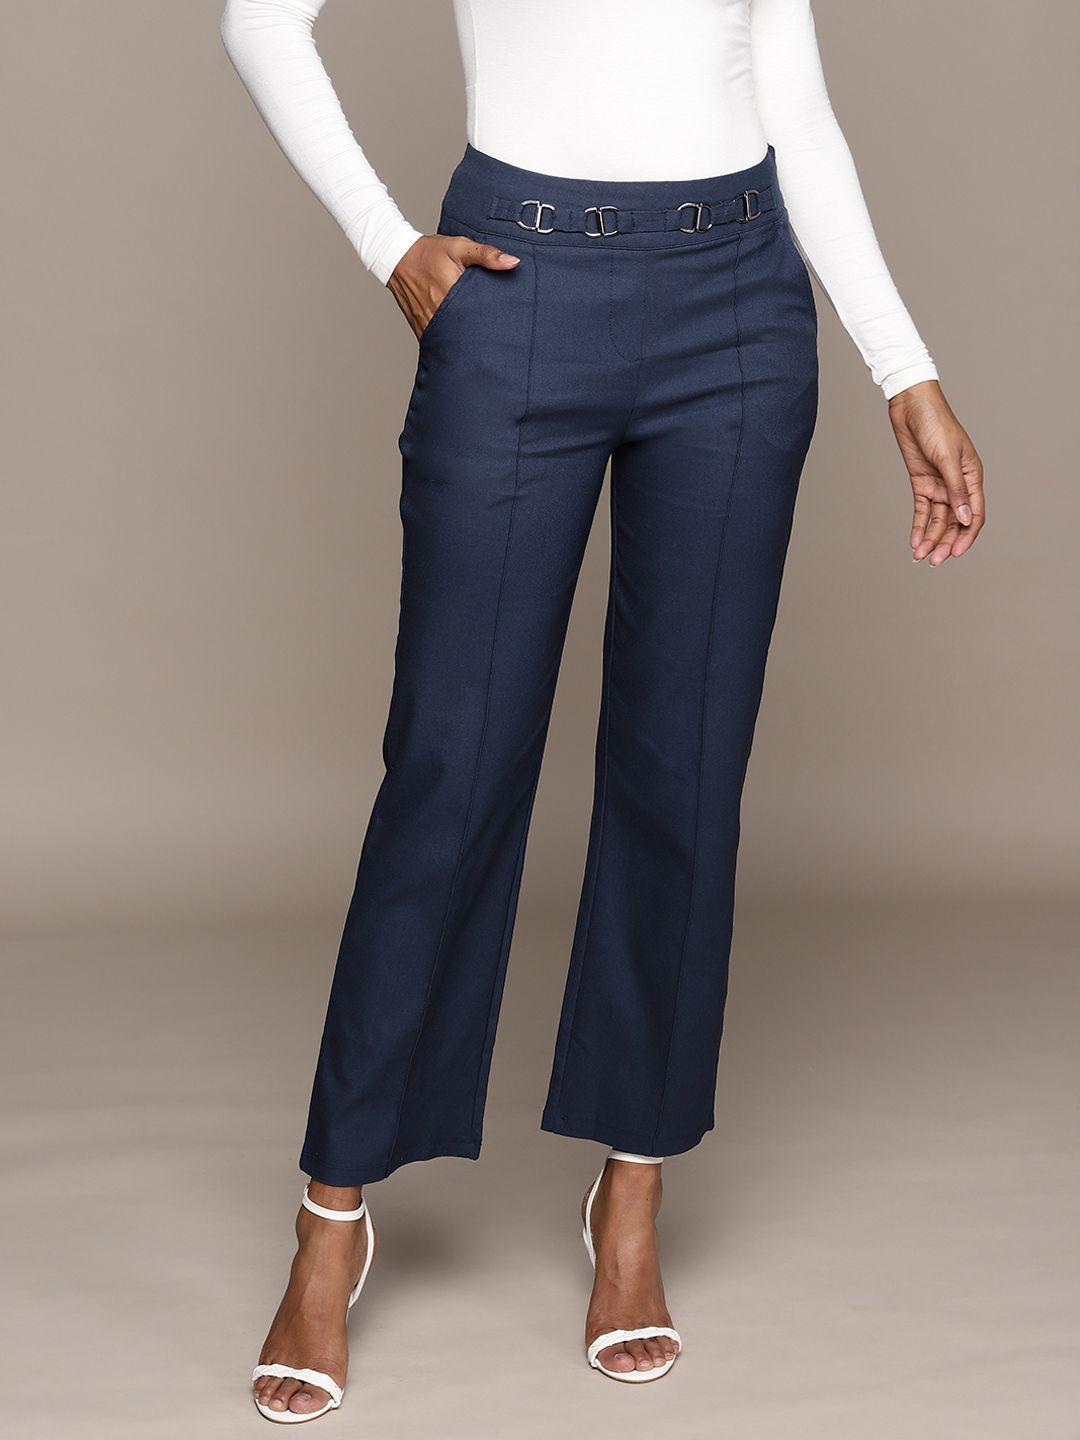 bebe women navy blue all day solid pleated trousers